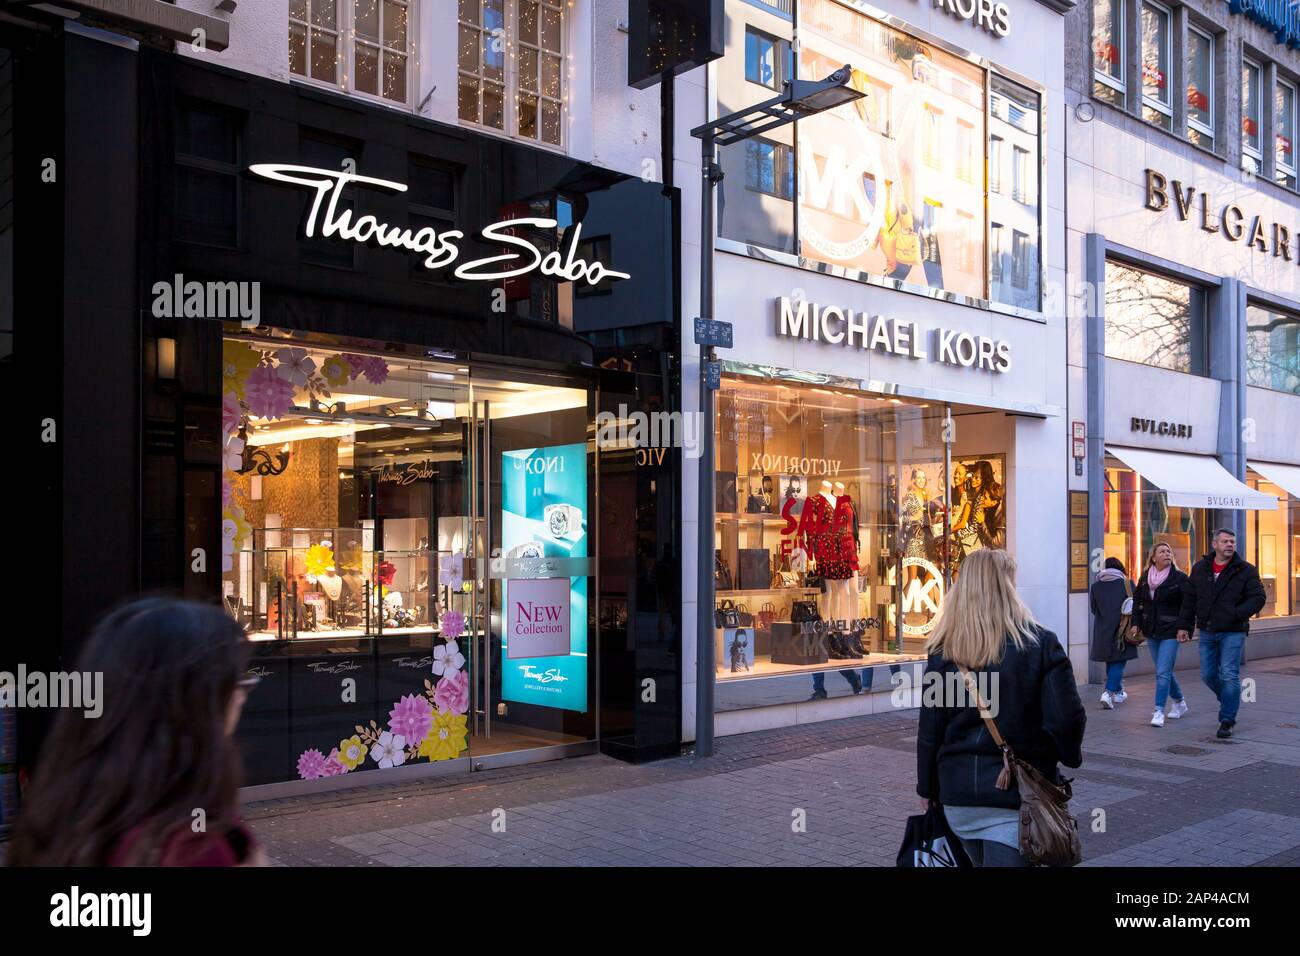 Michael Kors Shop Germany High Resolution Stock Photography and Images -  Alamy